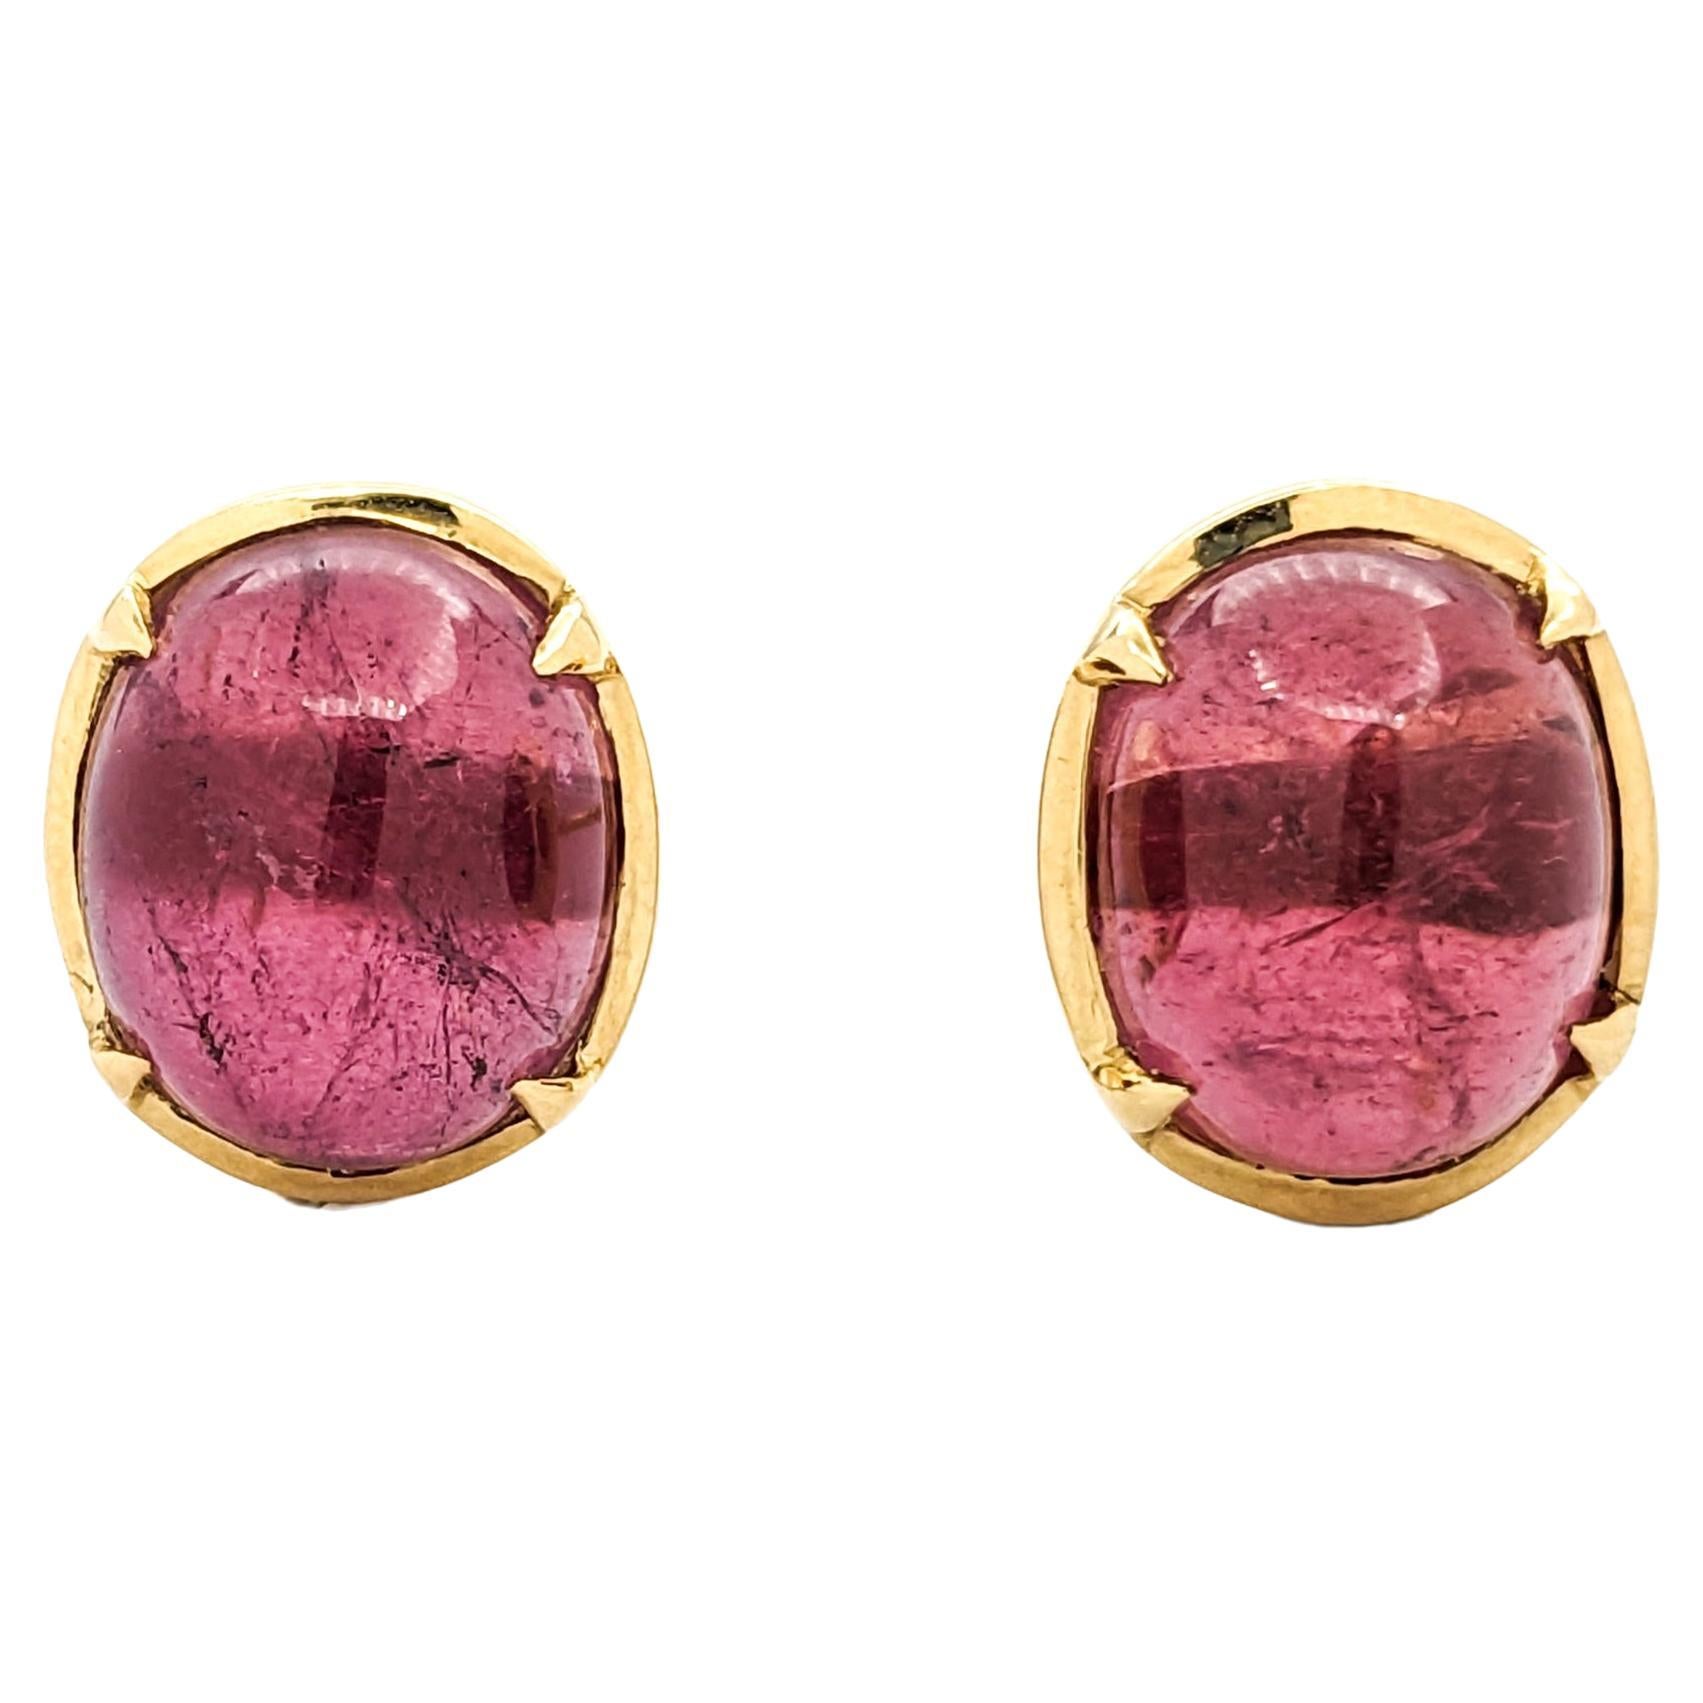 15.5ctw Cabochon Pink Tourmaline Earrings In Yellow Gold